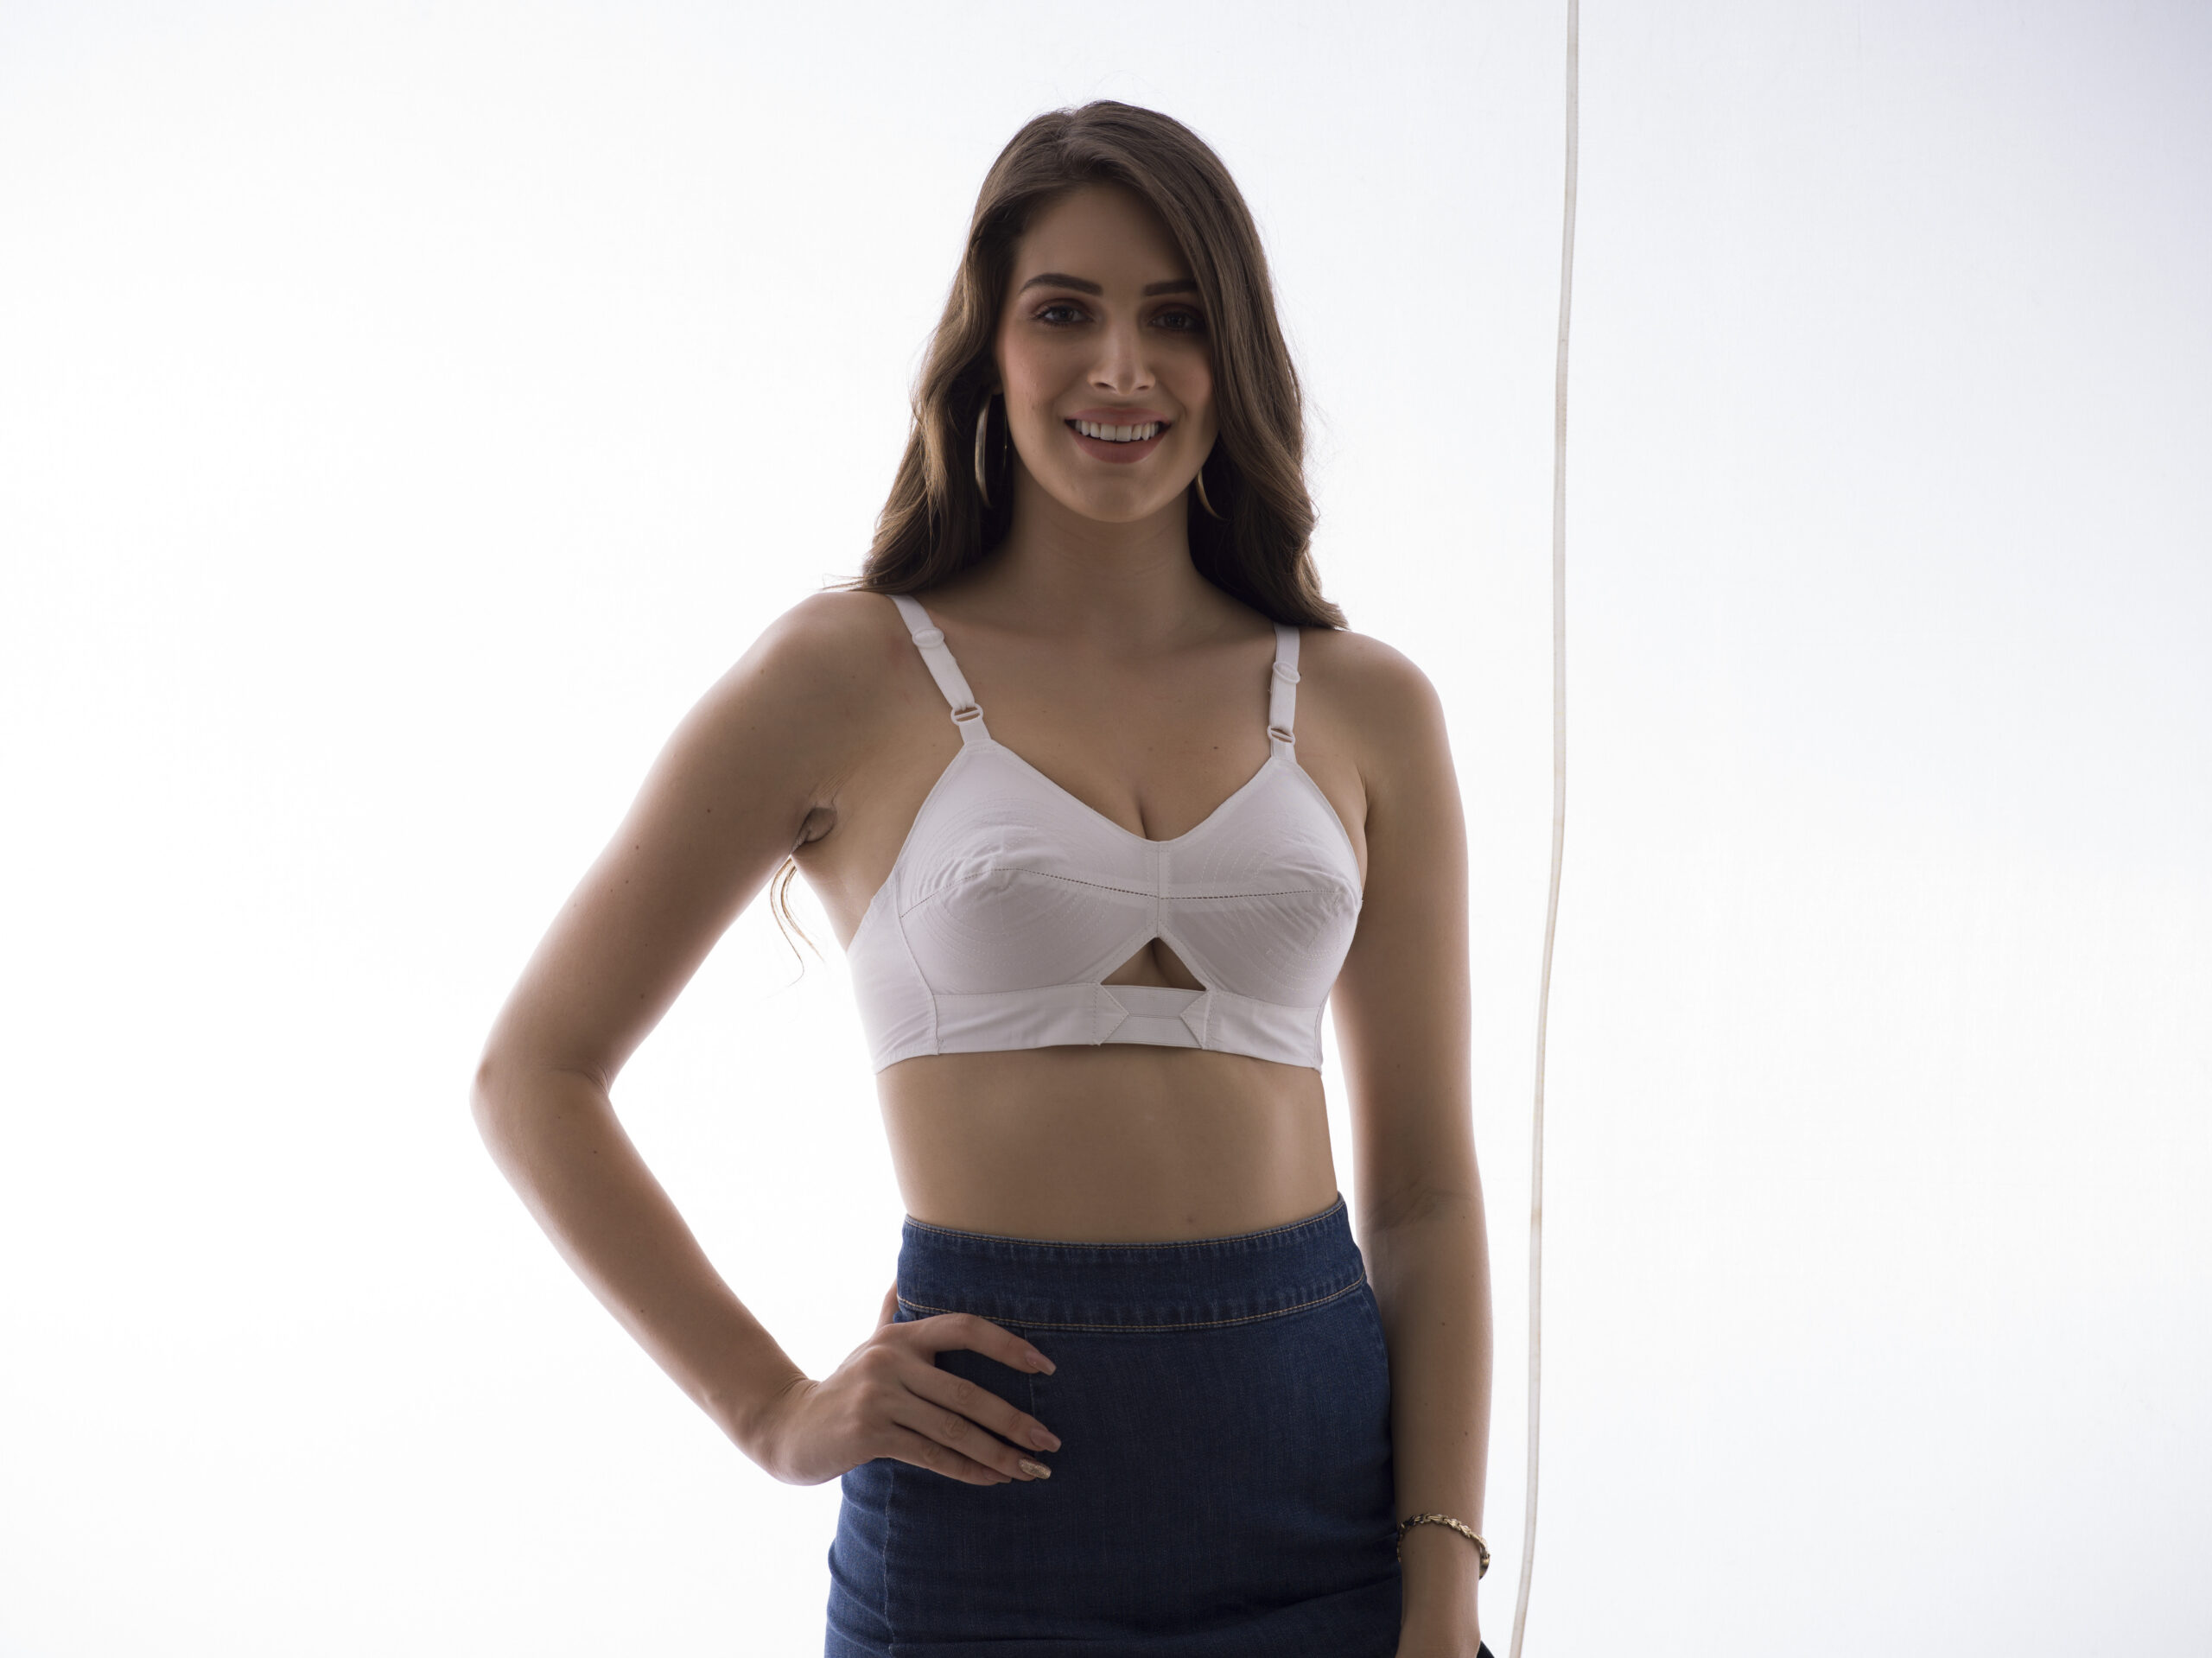 Classy yet stylish!! Pooja Ragenee is one stop for Comfort, Style and  Functionality. Know more at www.poojaragenee.com #PoojaRagenee #fashion  #bra #bras